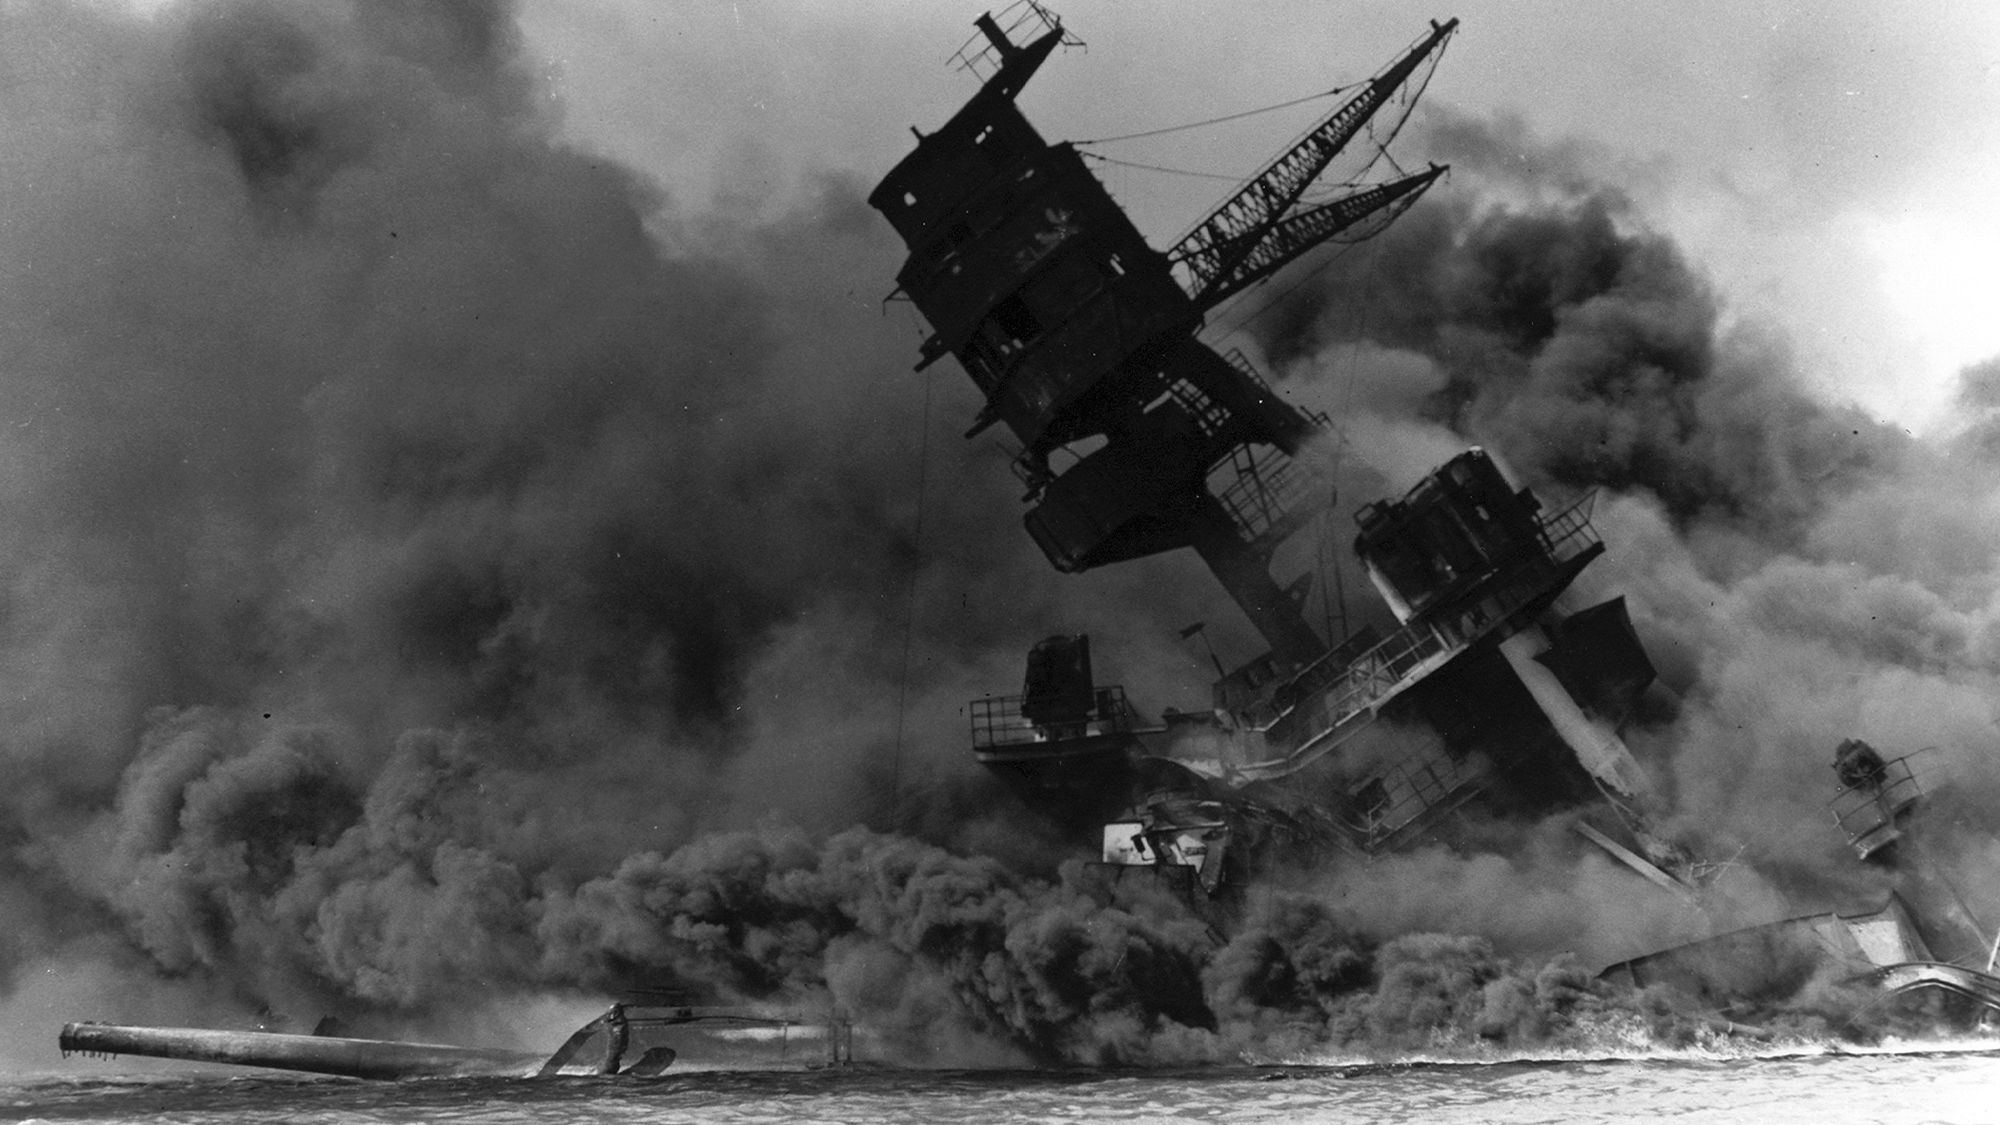 A black and white archival photo of the USS Arizona sinking during the attack on Pearl Harbor on December 7, 1941.